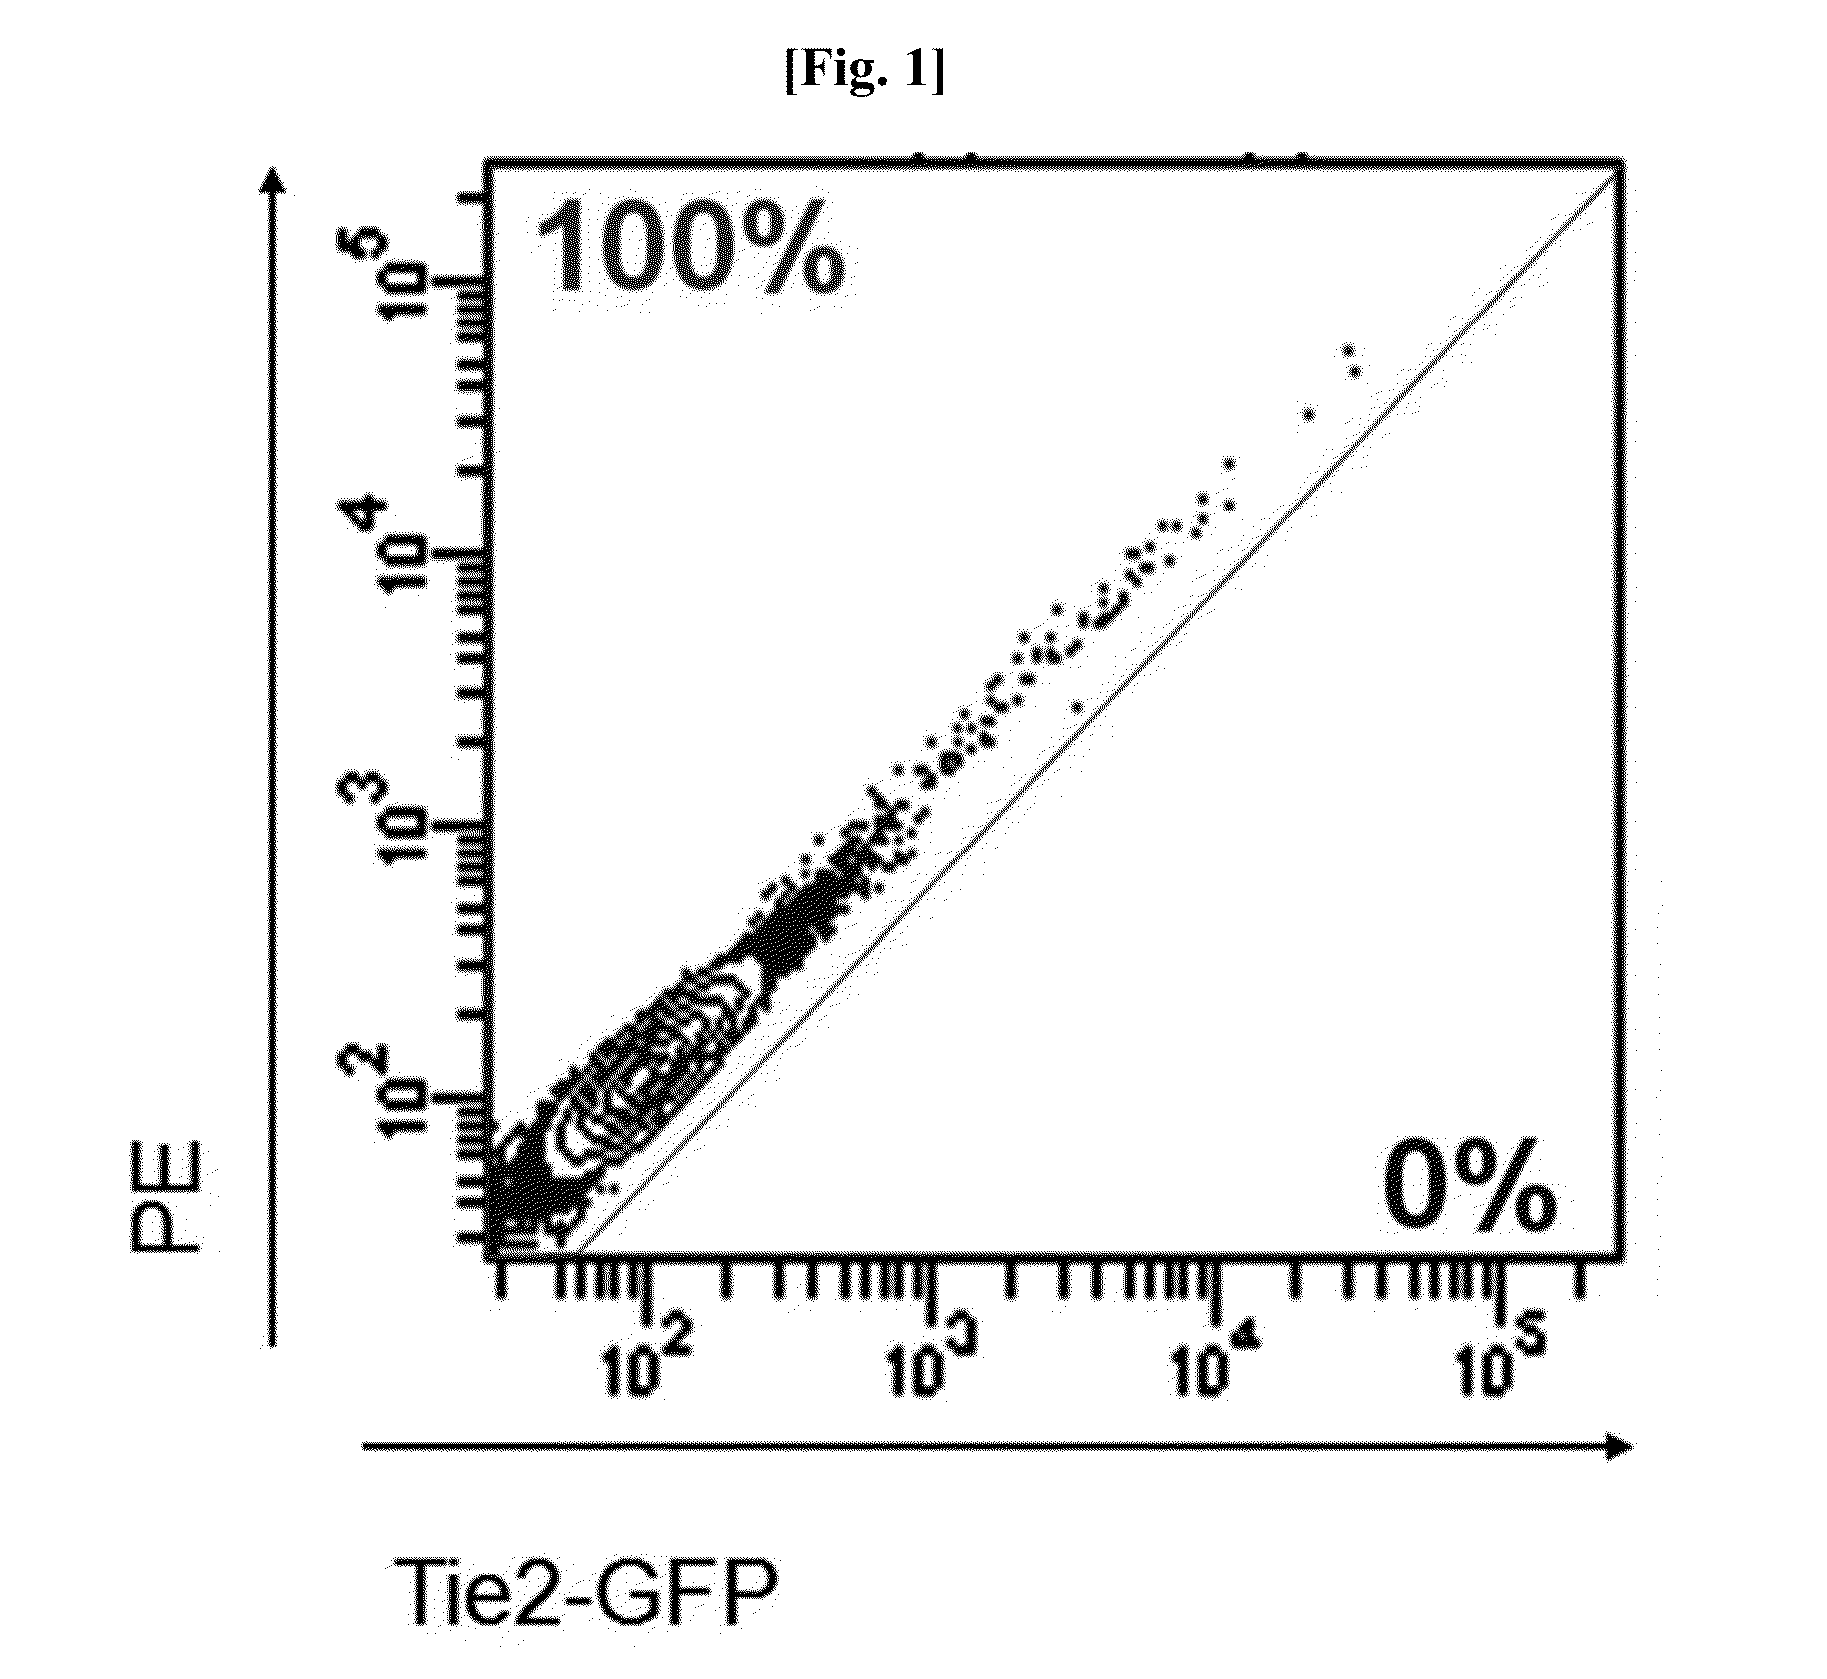 Method for preparing of endothelial cells by transformation (transdifferentiation) of adult fibroblast, and use thereof